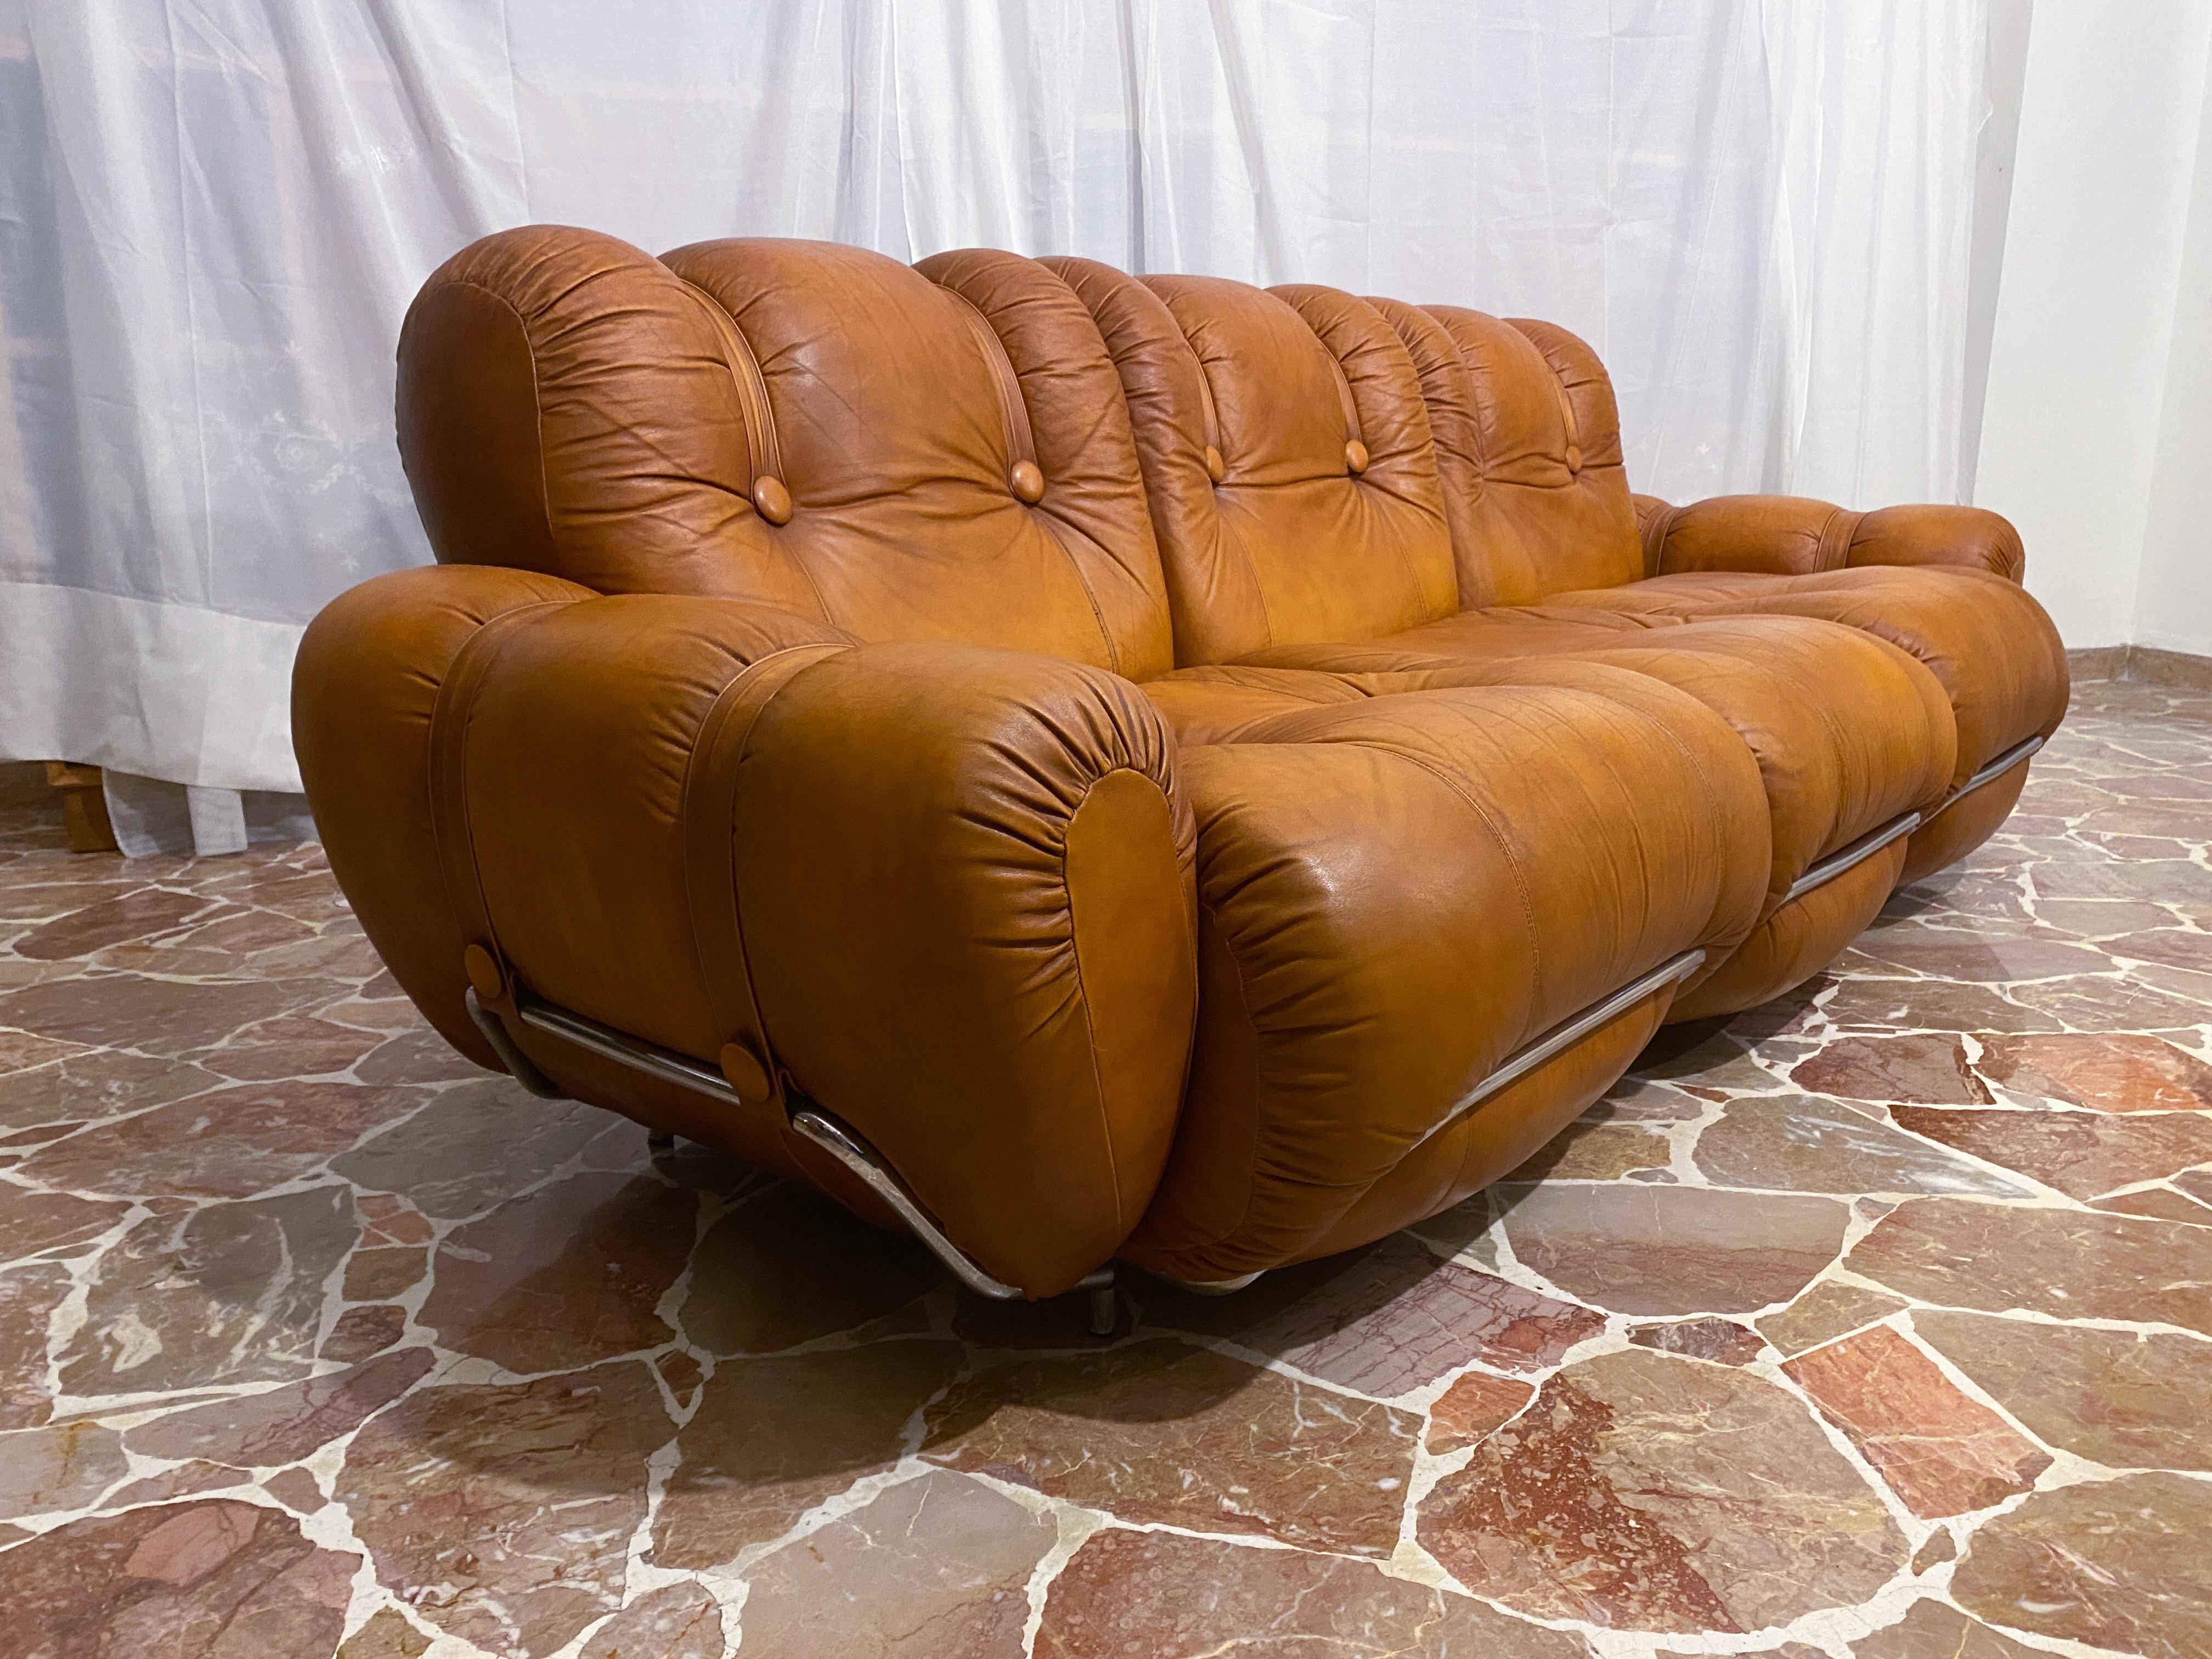 Italian Midcentury Three-Seater Natural Leather Space Age Sofa, 1970s For Sale 3